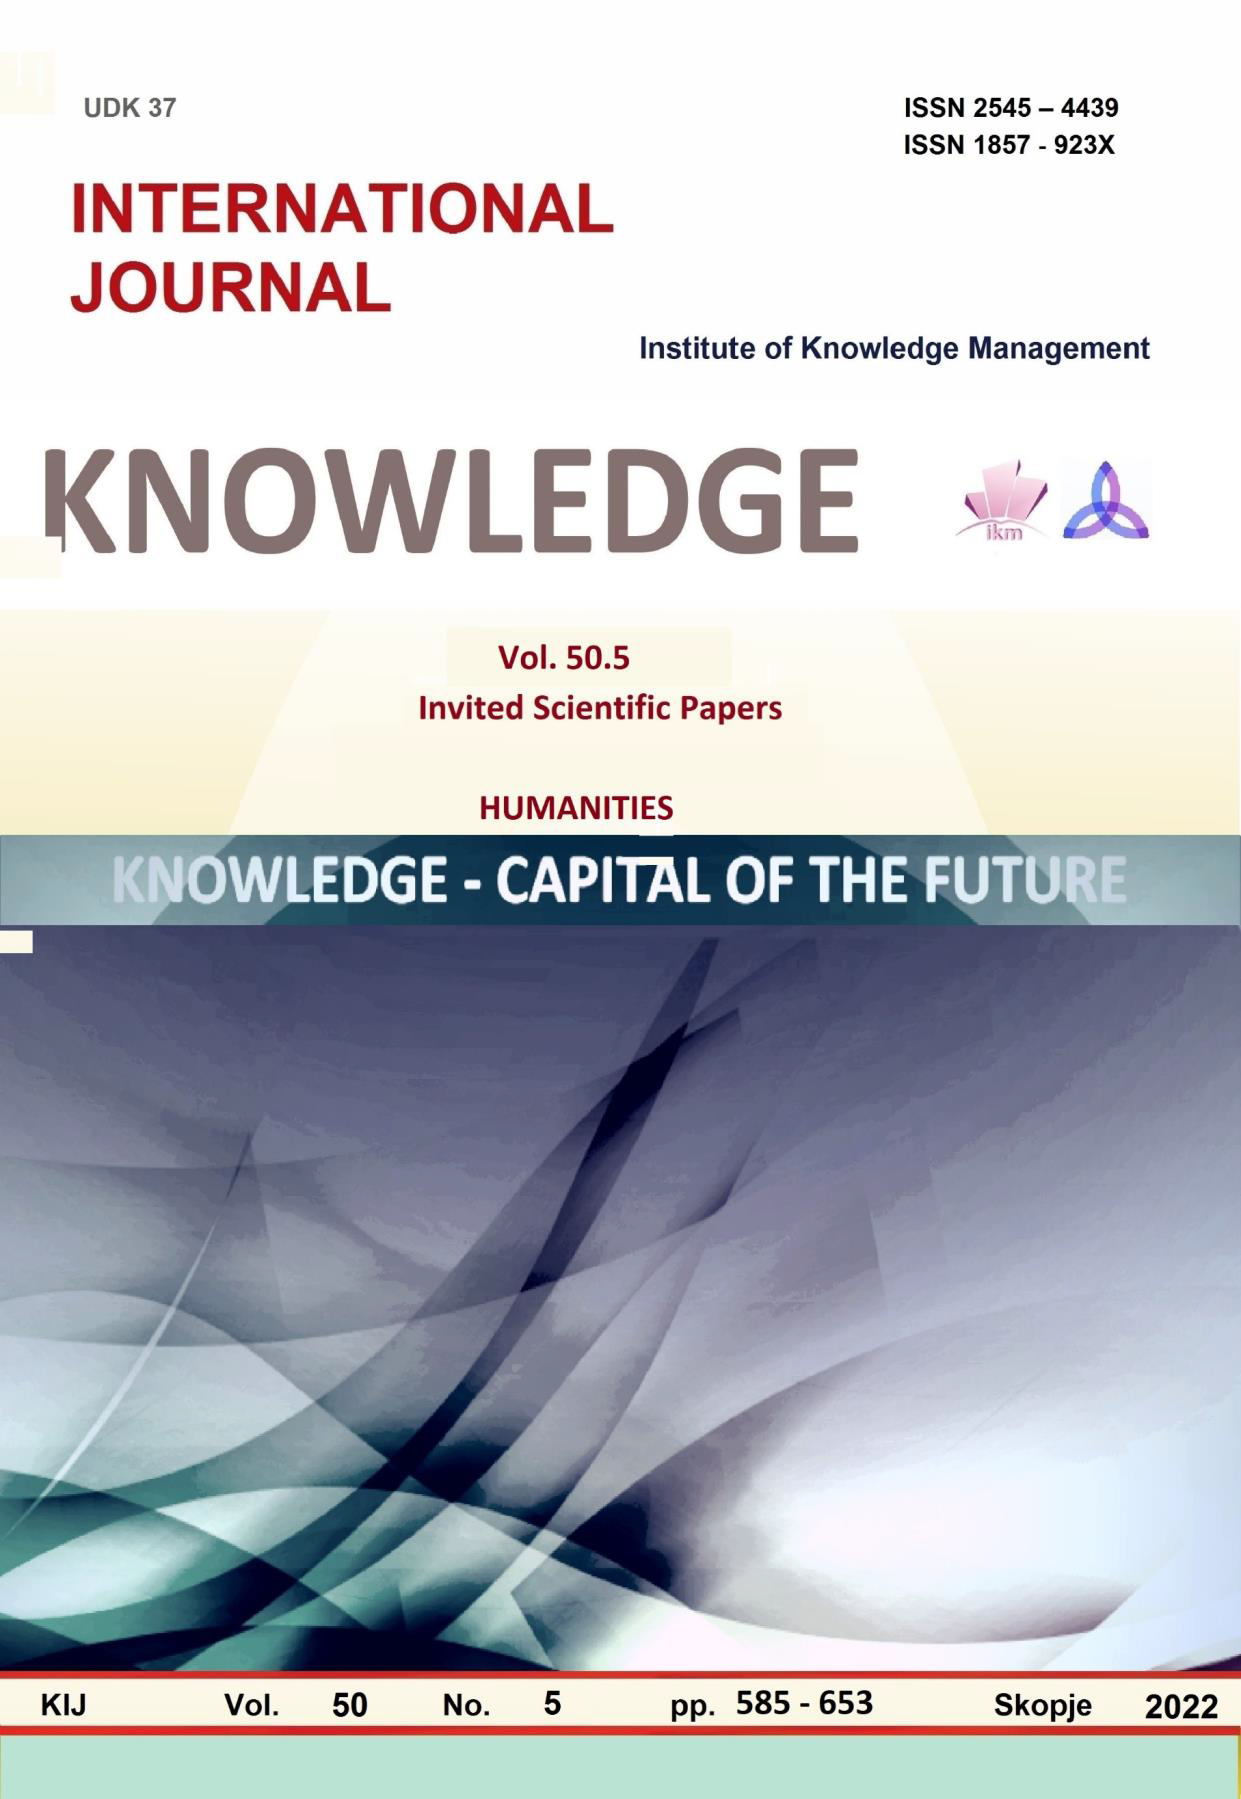 					View Vol. 50 No. 5 (2022): Knowledge - Capital Of The Future
				